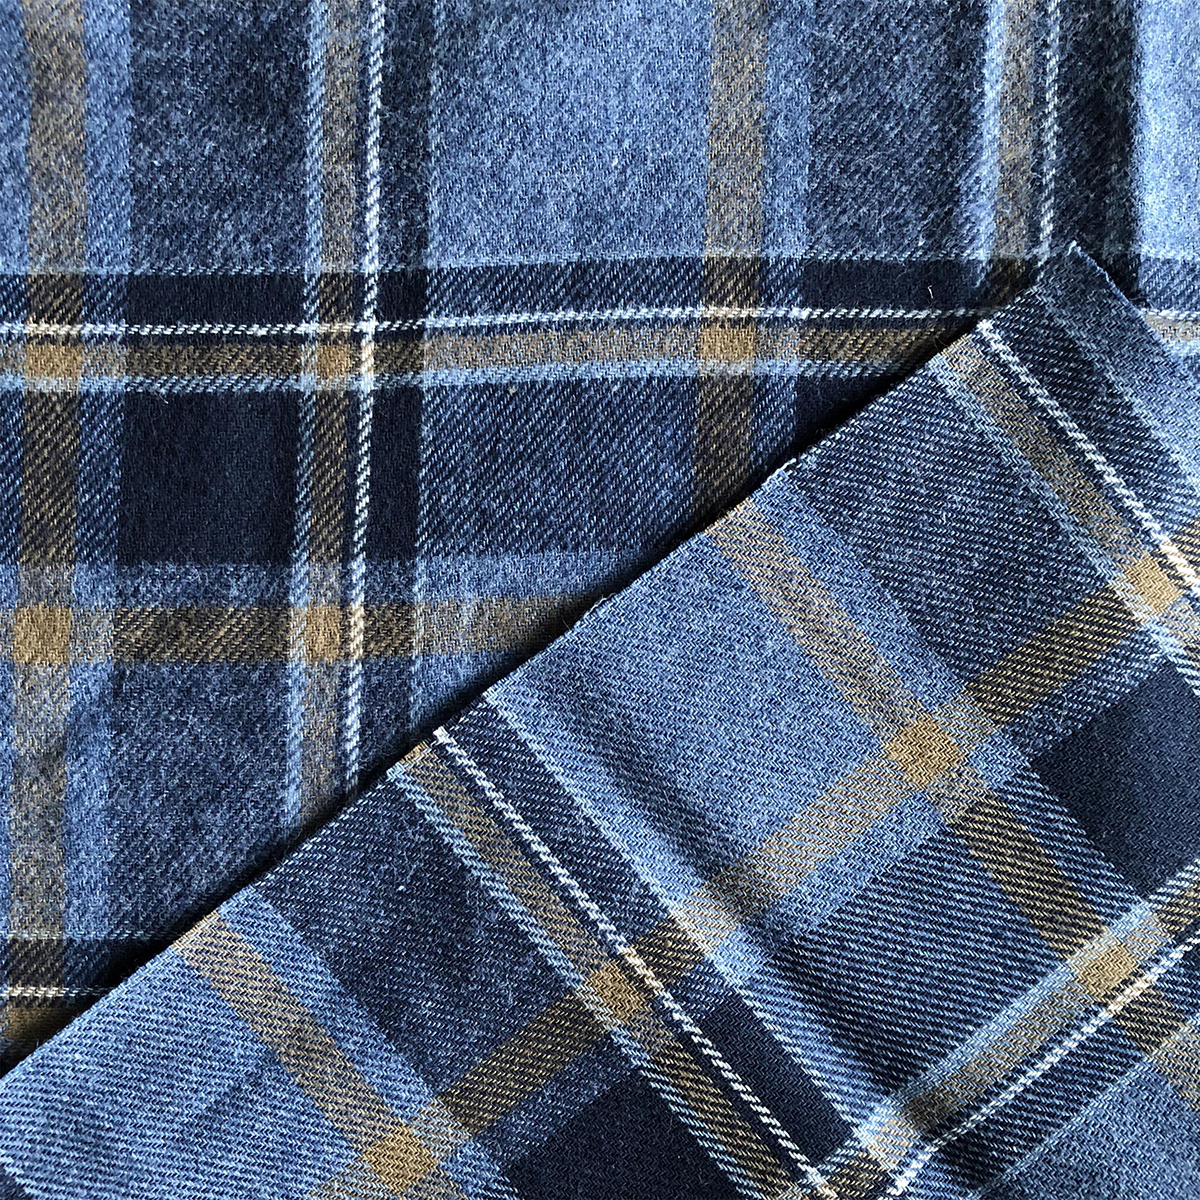 Cotton Flannel Fabric for men's casual shirts by melange yarn 100% ...